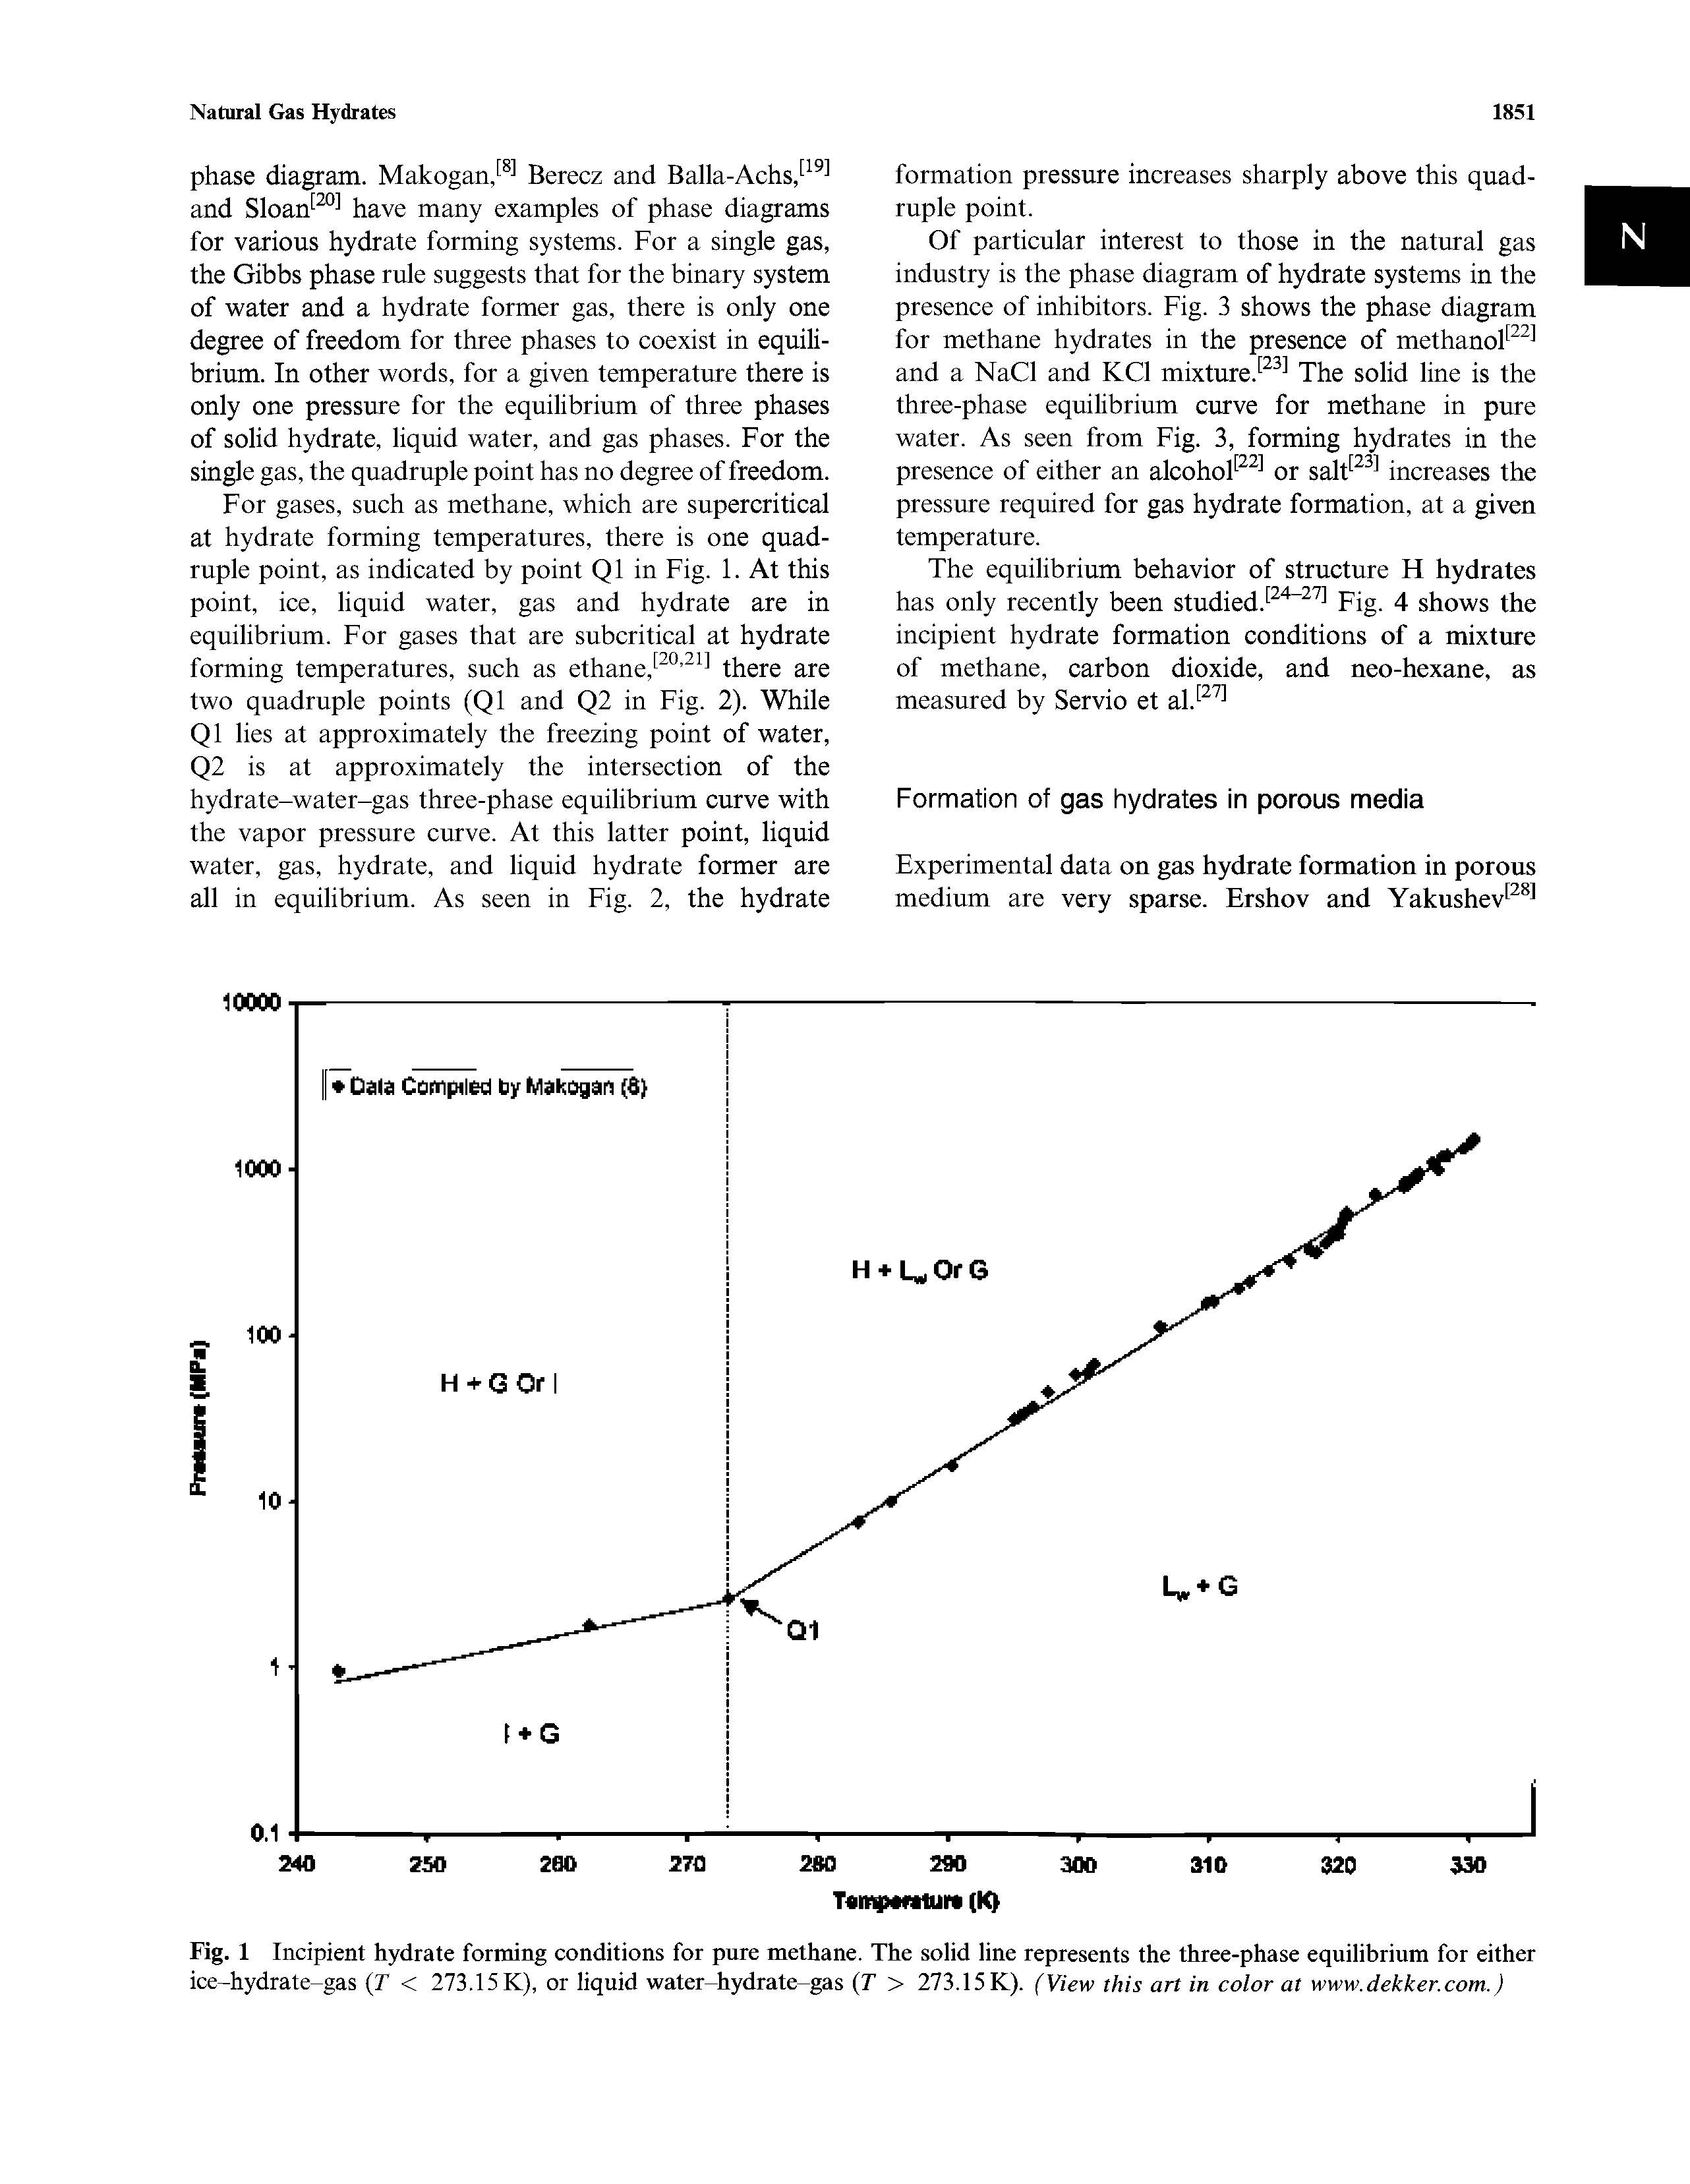 Fig. 1 Incipient hydrate forming conditions for pure methane. The solid line represents the three-phase equilibrium for either ice-hydrate-gas T < 273.15K), or liquid water-hydrate-gas (T > 273.15K). (View this art in color at www.dekker.com.)...